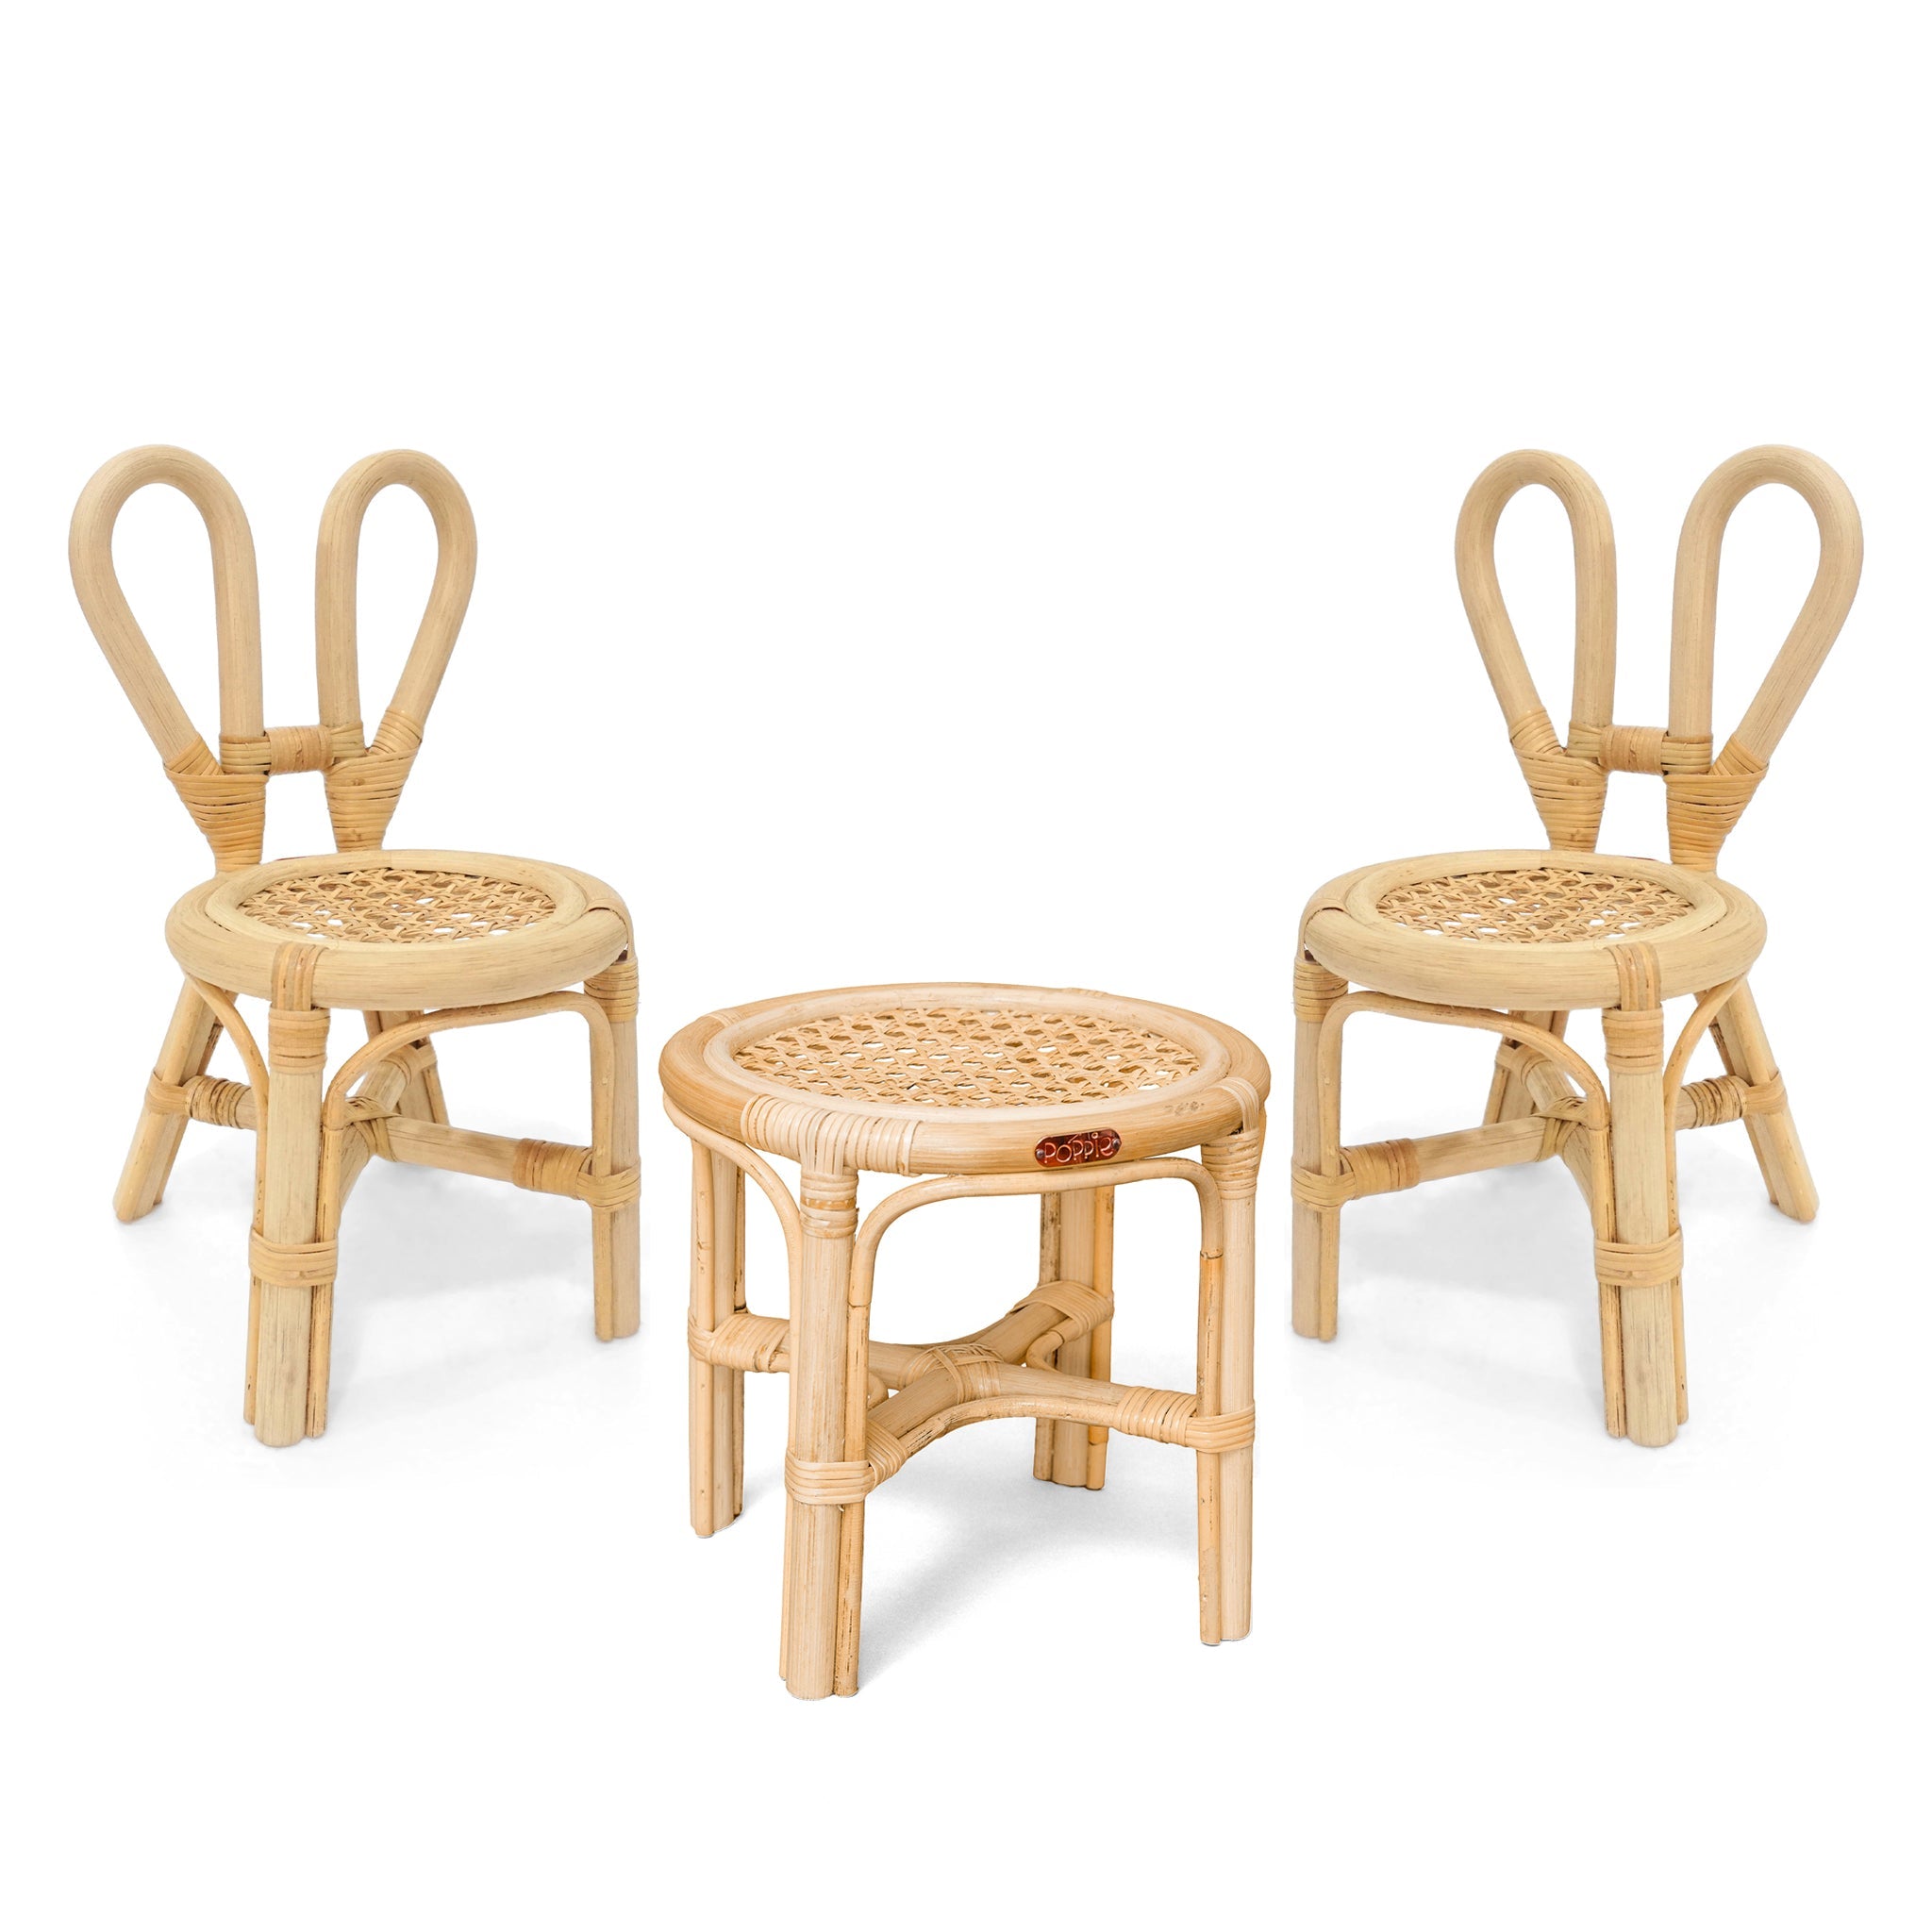 Poppie Mini Table & Chairs Set for Dolls